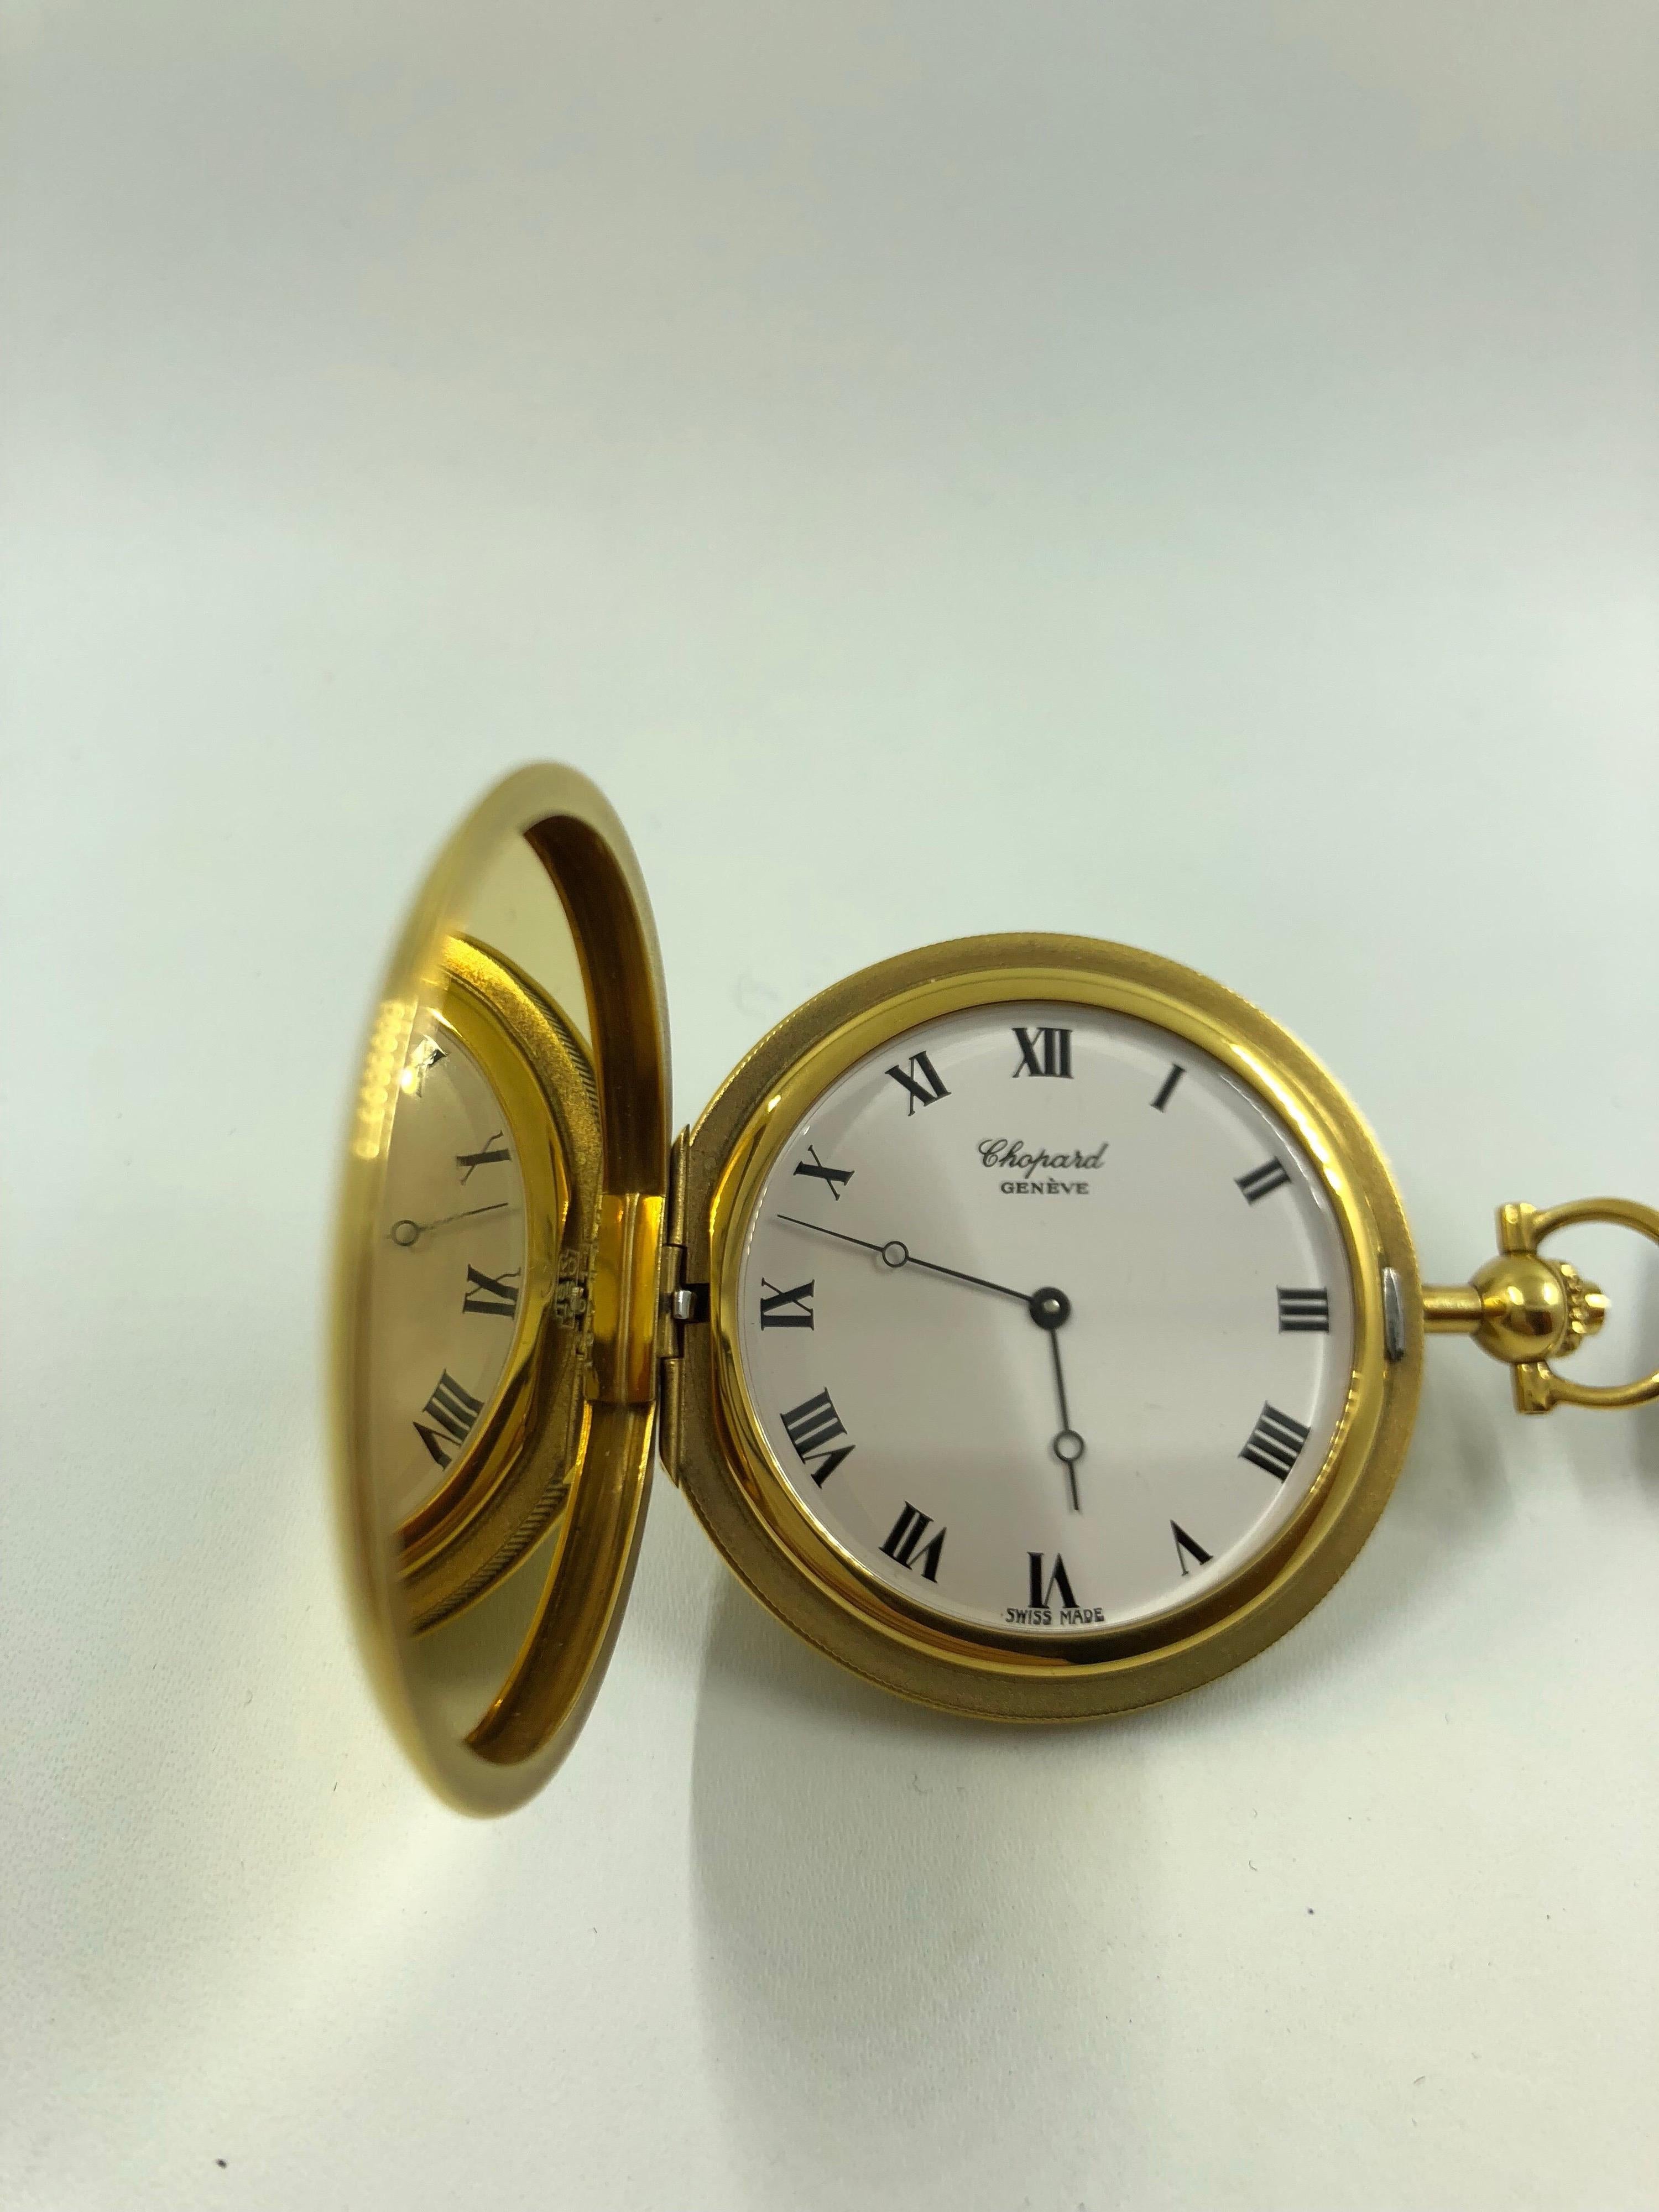 A Chopard Gold Case Pocket Watch, manual winding with spring cover. White porcelain dial with black Roman numerals.
Reference: 3014
Plant / Caliber: Hand-wound
Functions: hour, minute
Case: 750 / 18K yellow gold
Glass: Plexiglas
Diameter approx .:42